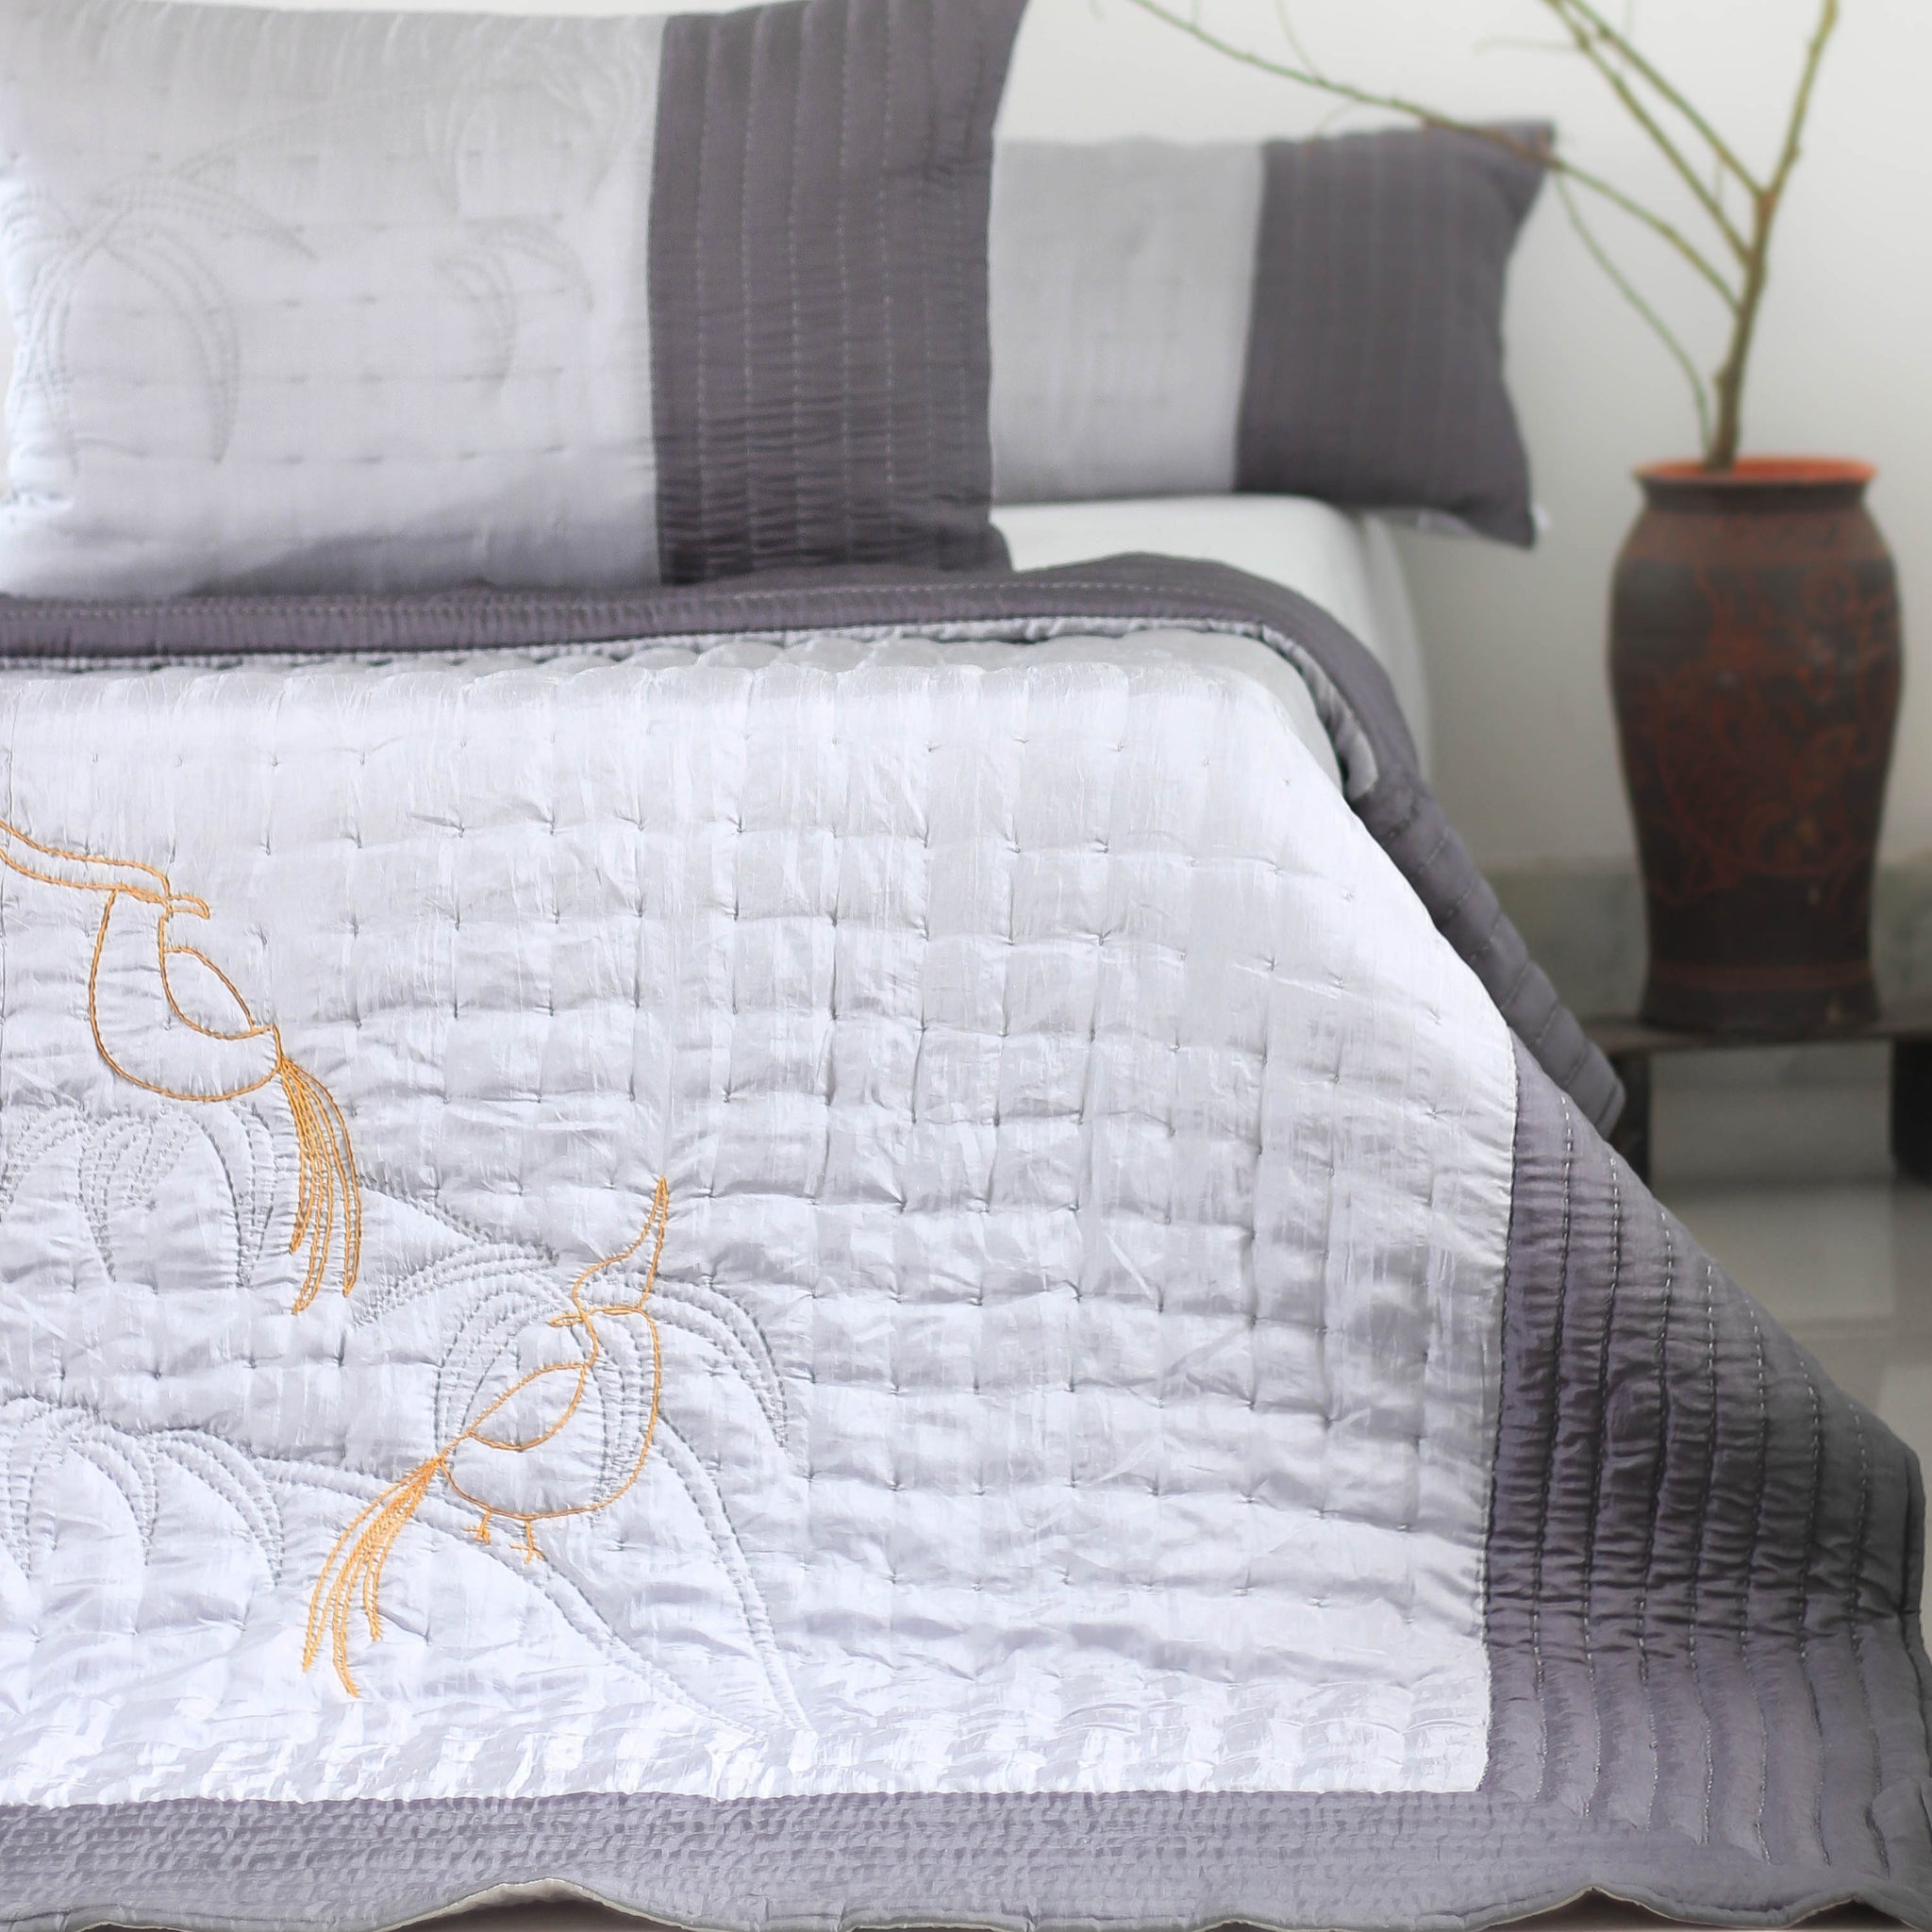 Mulberry Silk Quilt and Shams Comforter sets-The Thorn Bird Hand Embroidery